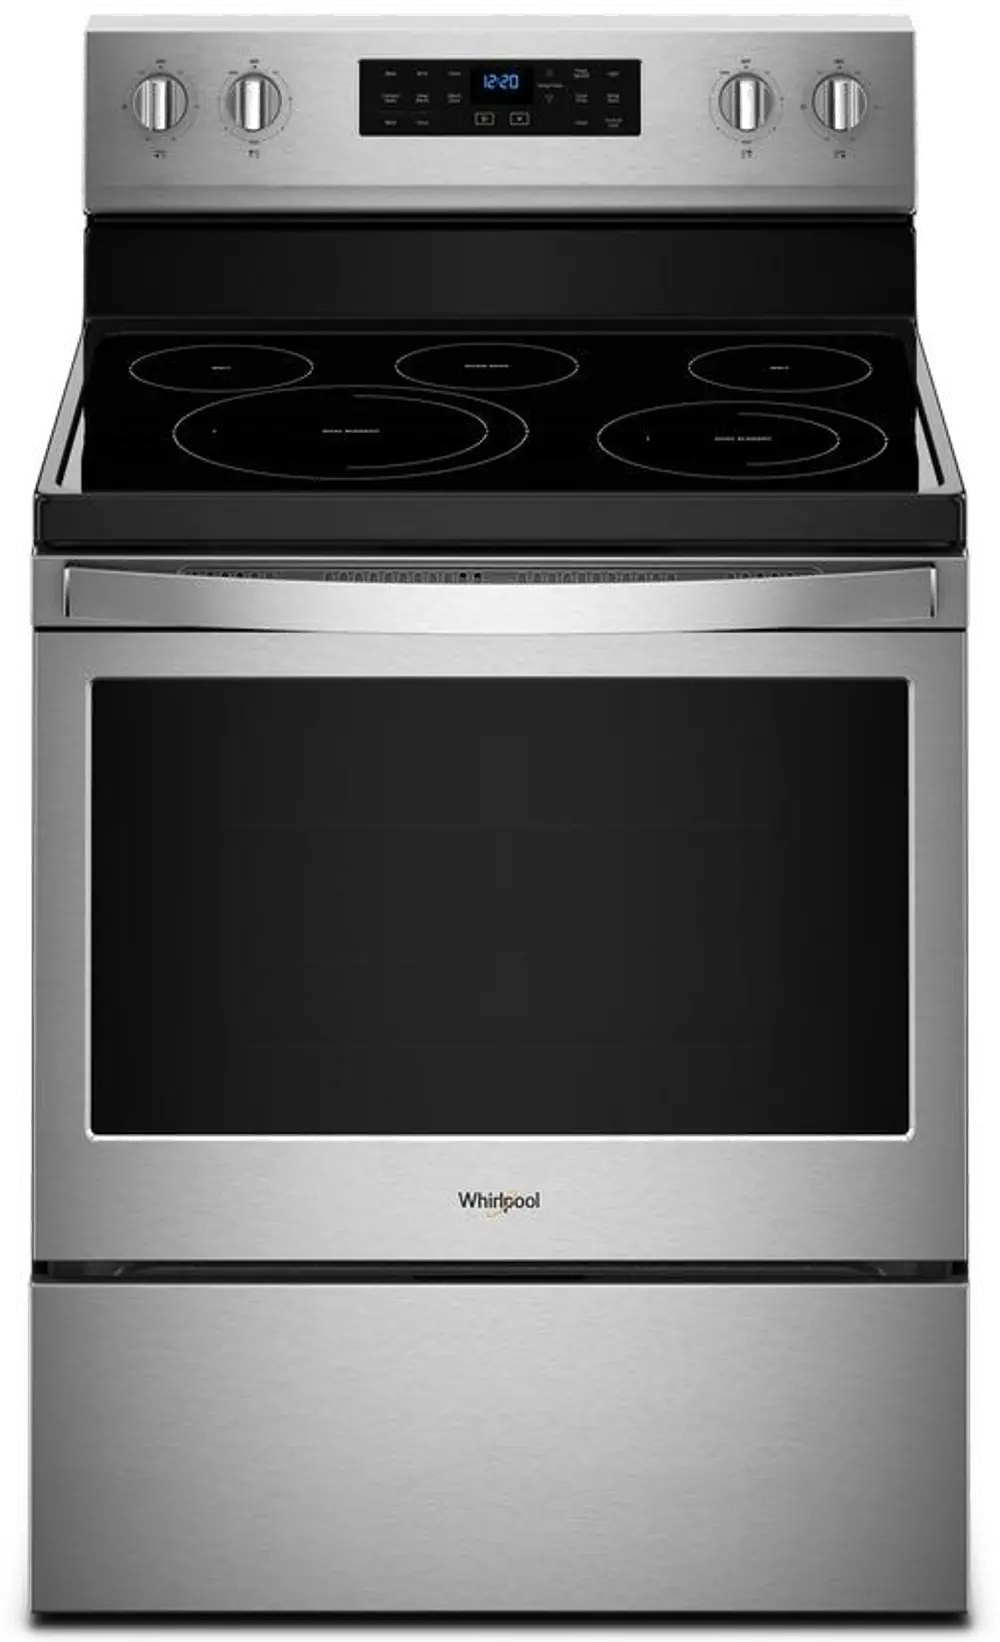 WFE550S0HZ Whirlpool 5.3 cu. ft. Freestanding Electric Range with Fan Convection Cooking - Stainless Steel-1